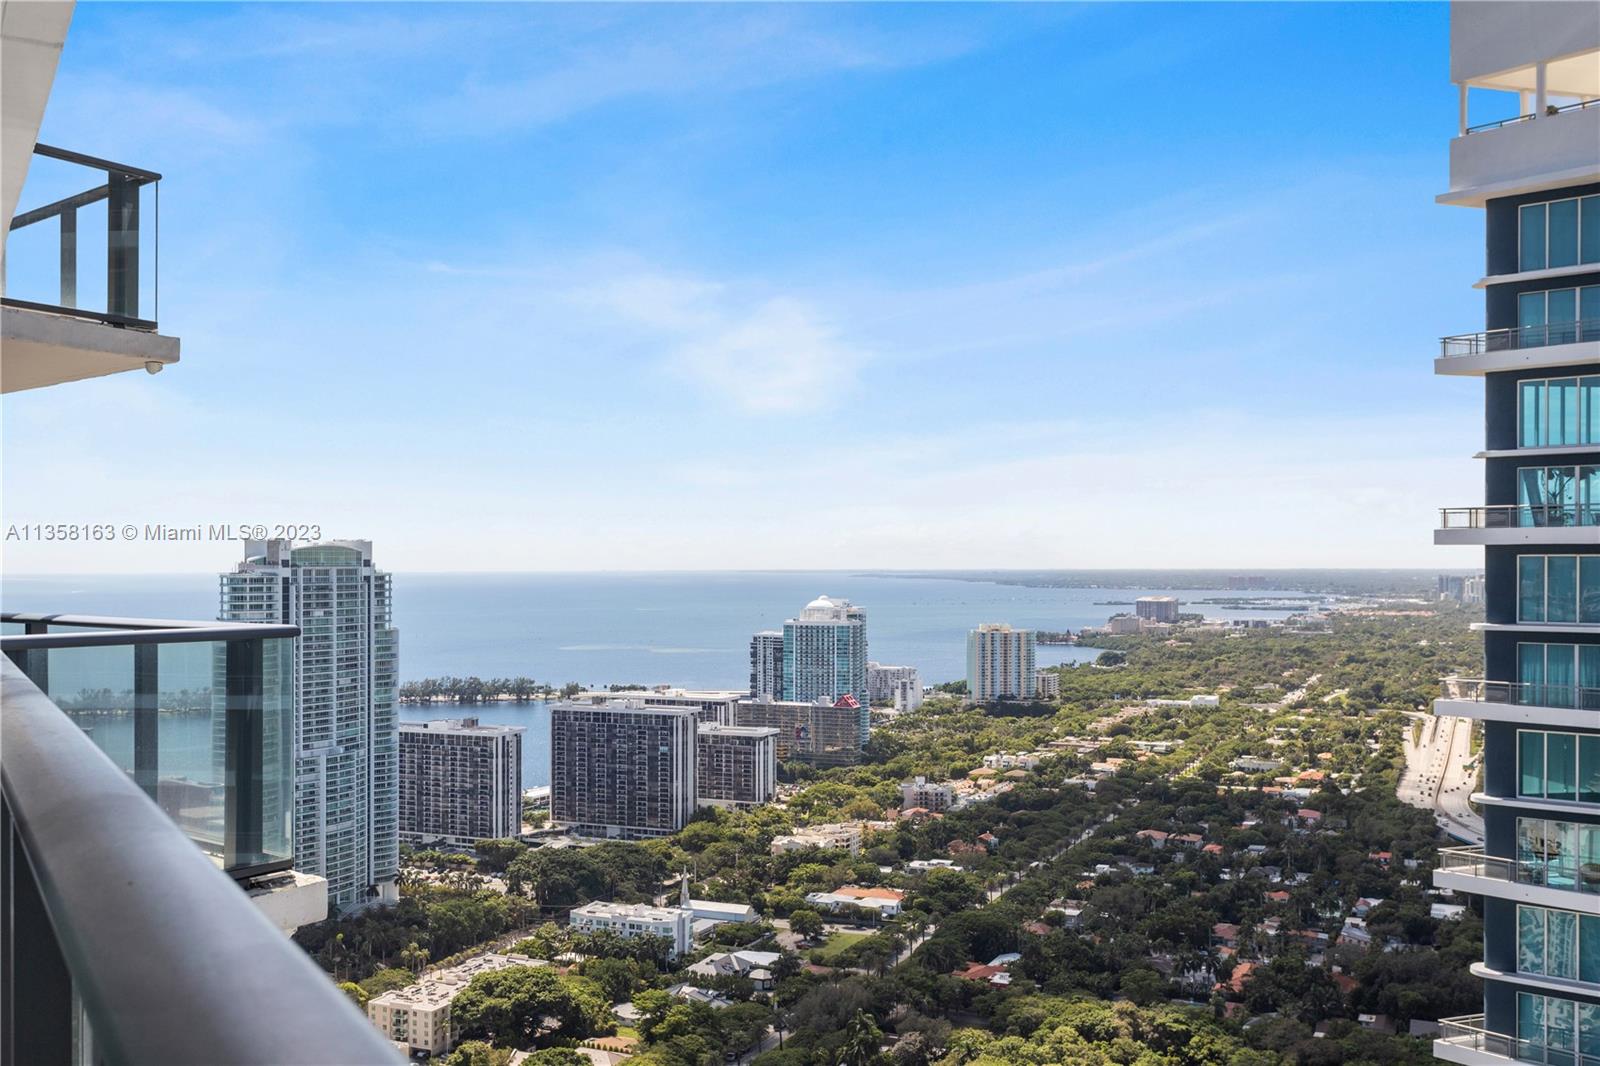 Located in heart of Brickell! 1 Bed 1 bath with pleasing panoramic views of the ocean, Key Biscayne and The Roads. Bosh stainless steel appliances, build up closets and window treatments. Best amenities and hotel services!